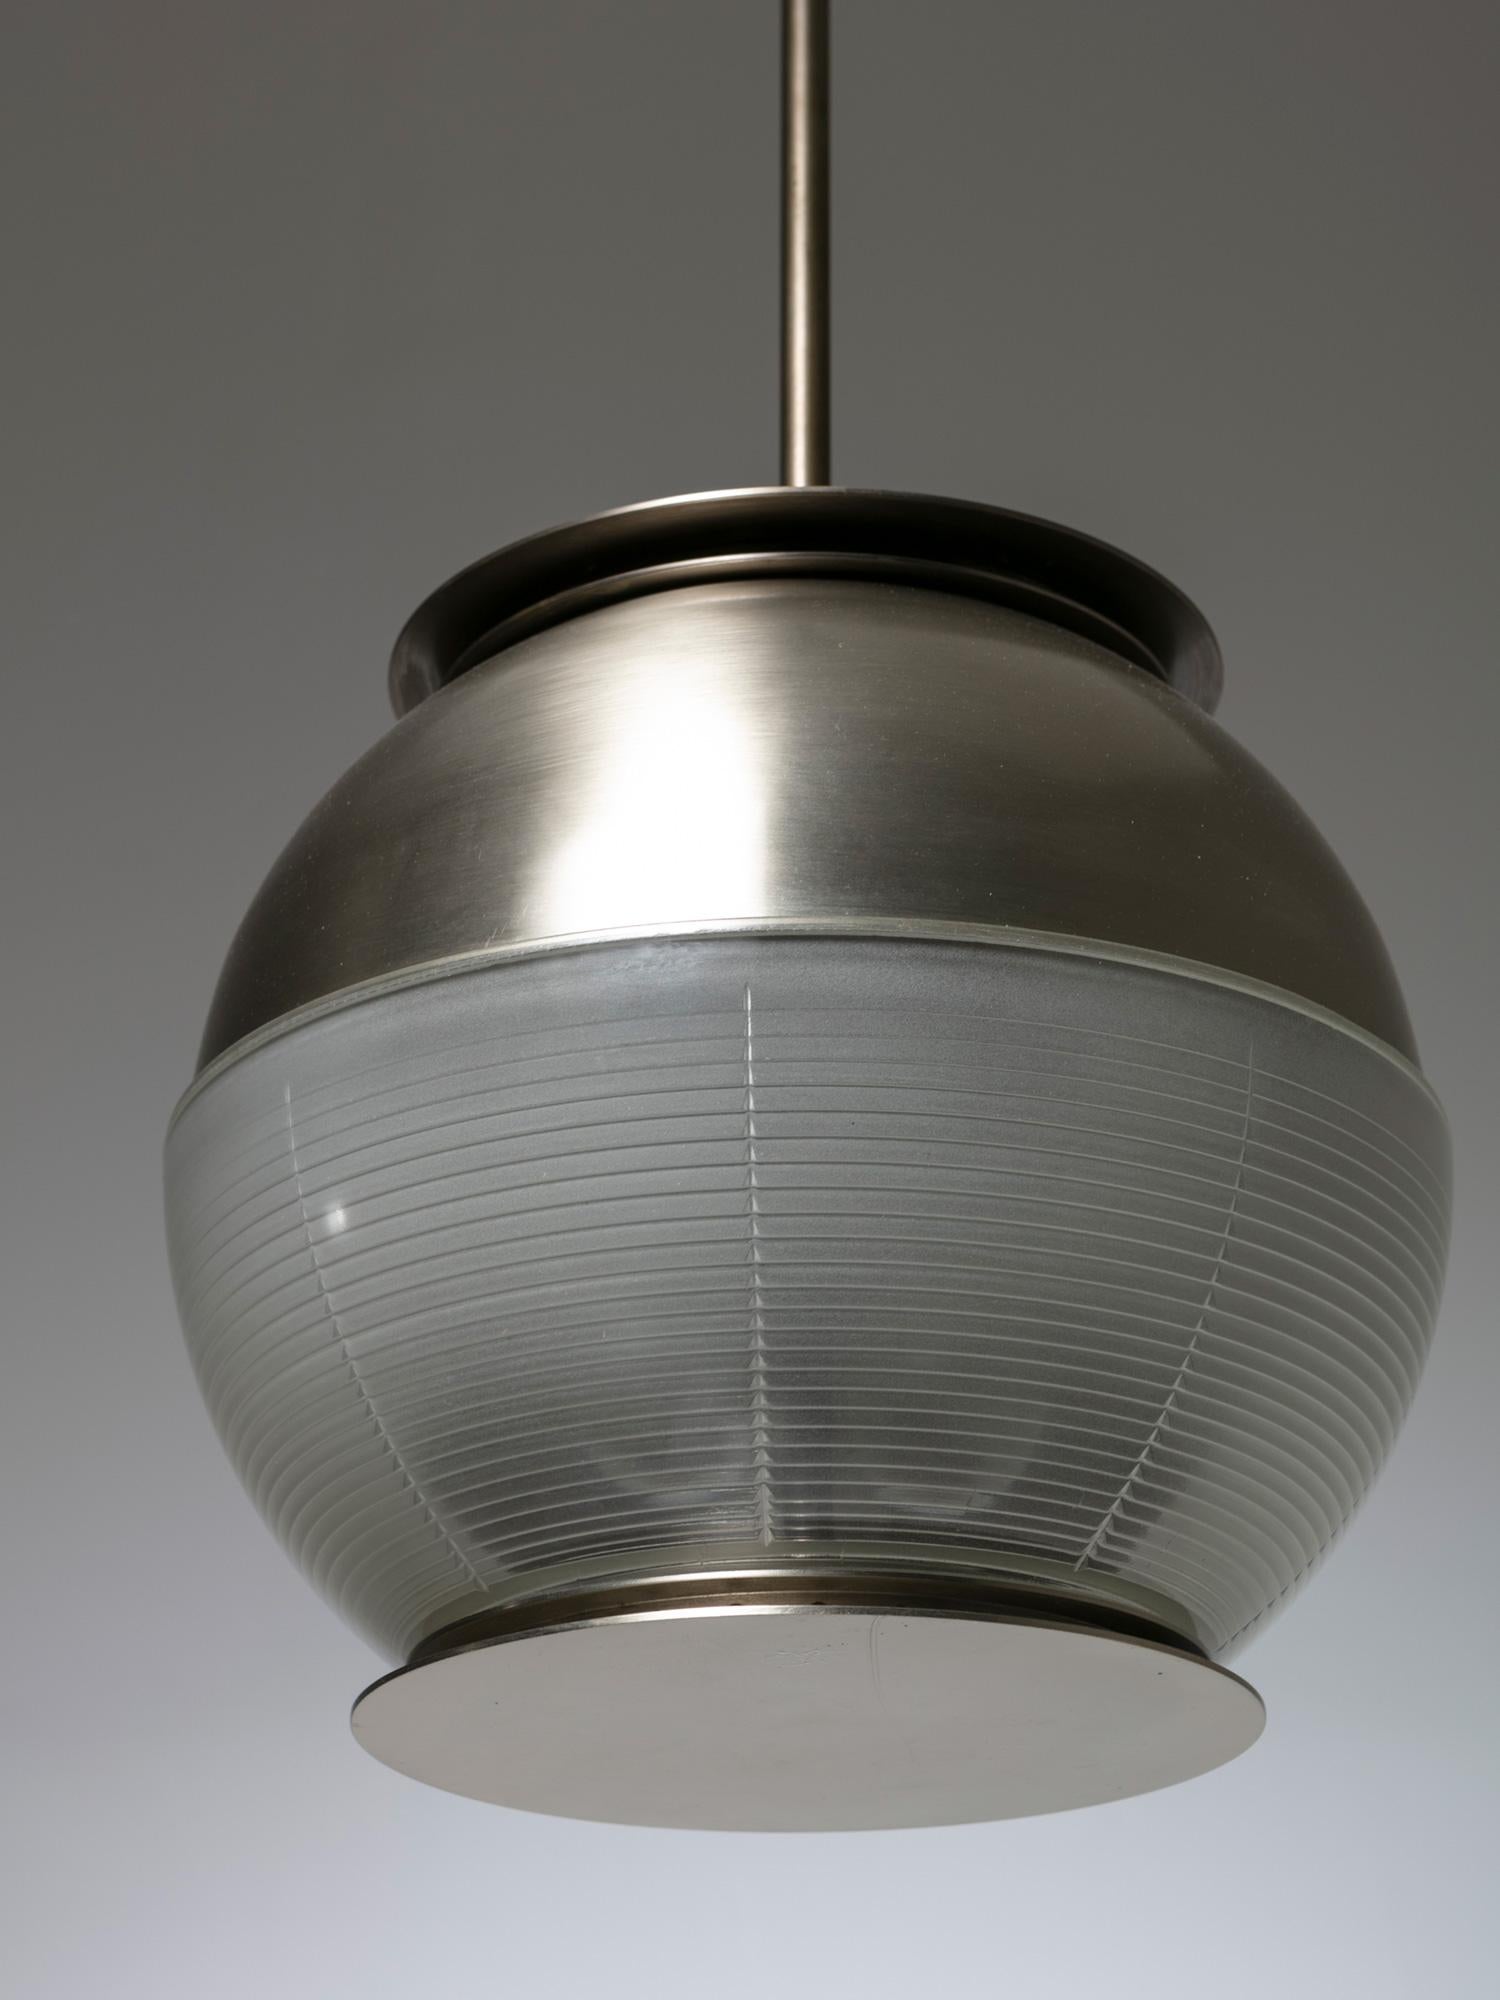 Pendant lamp by Ignazio Gardella for Azucena.
The piece is a variation of the 